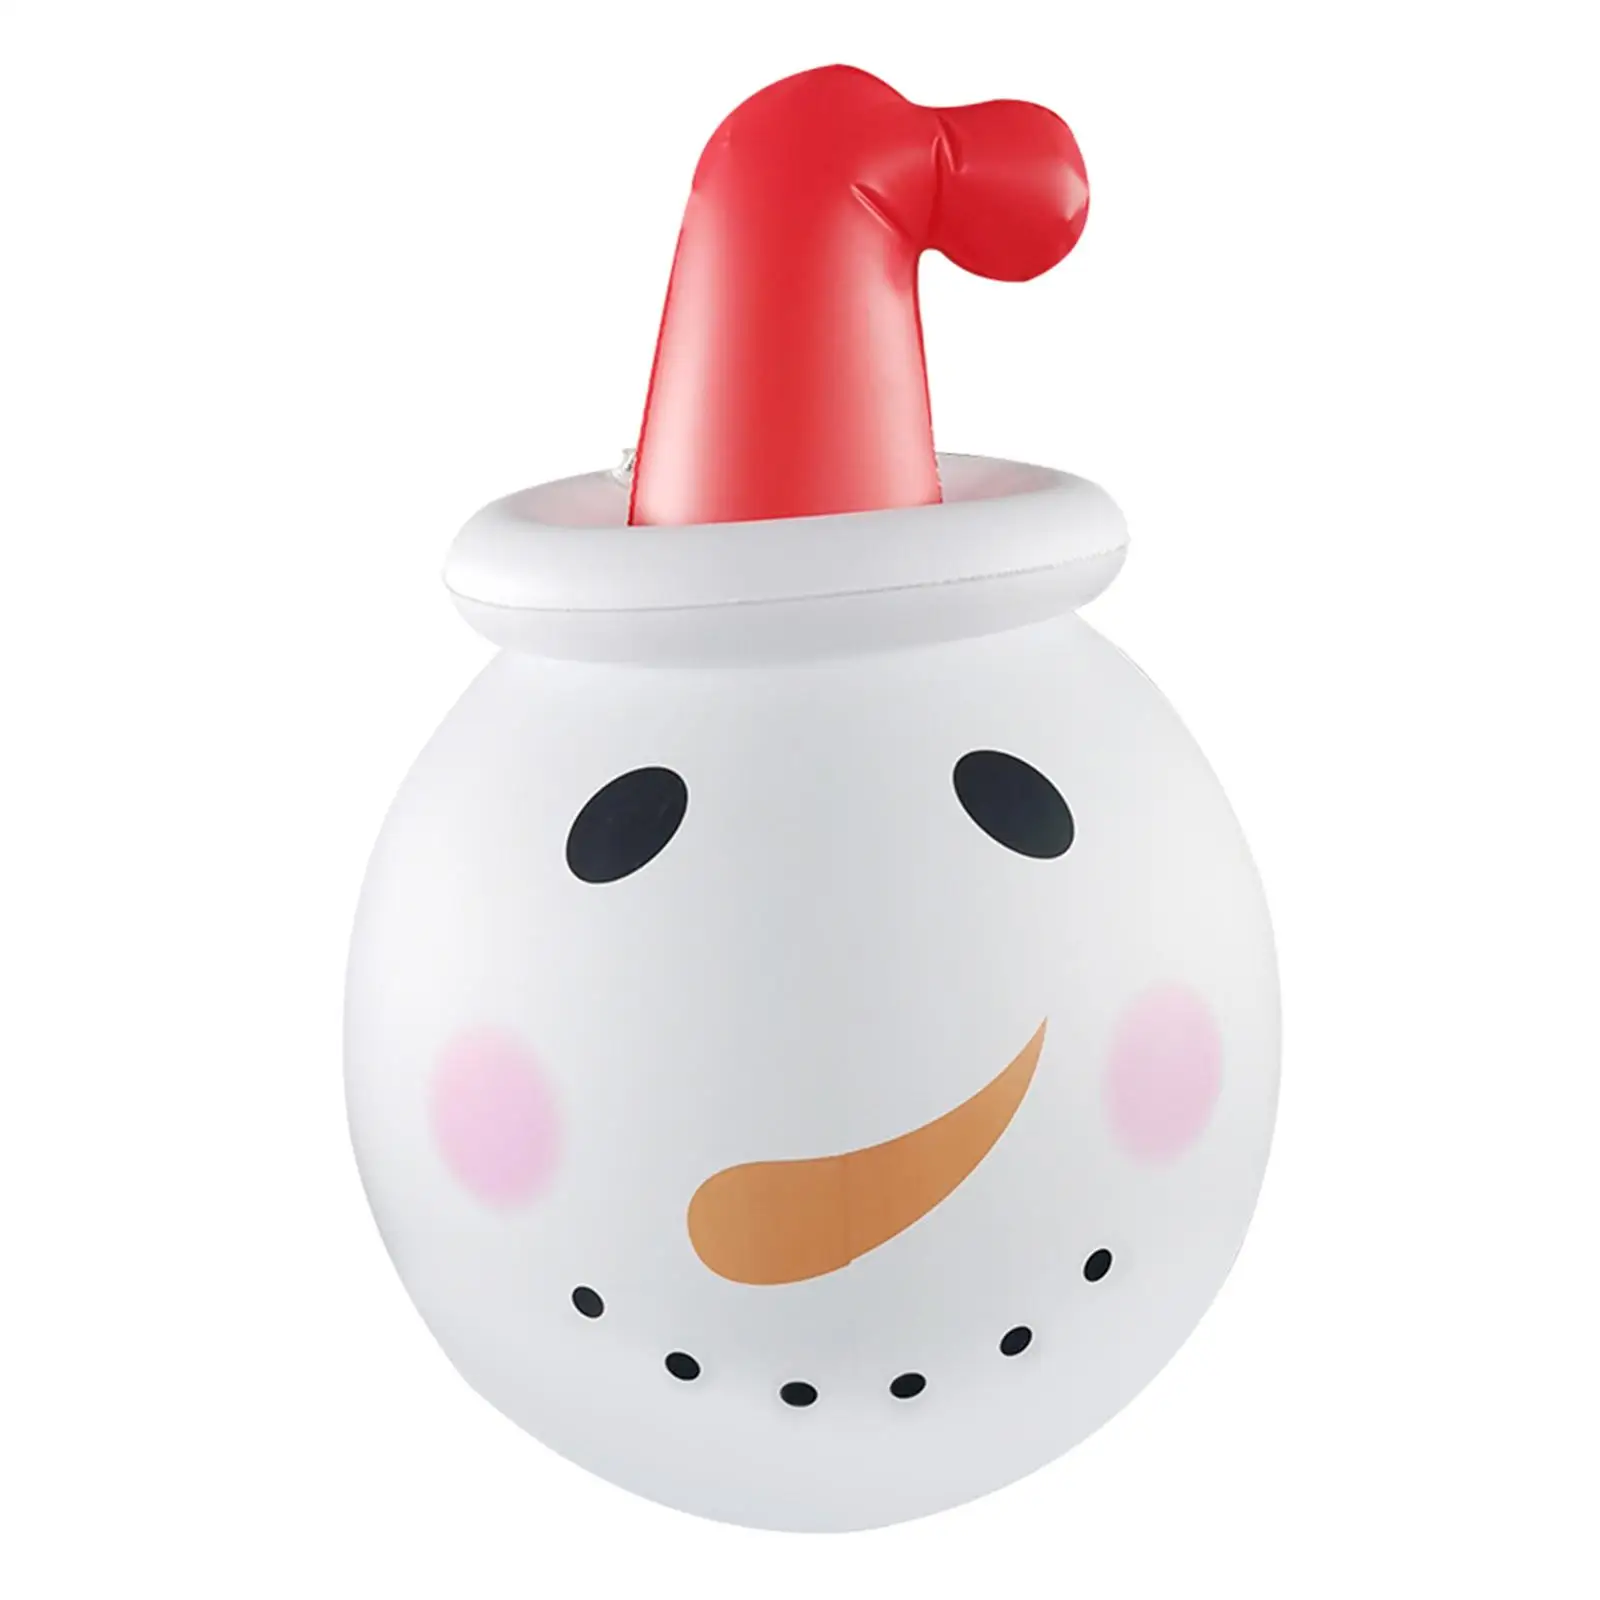 Christmas Inflatable Snowman Ornament Art for Xmas Party Cafe Restaurant